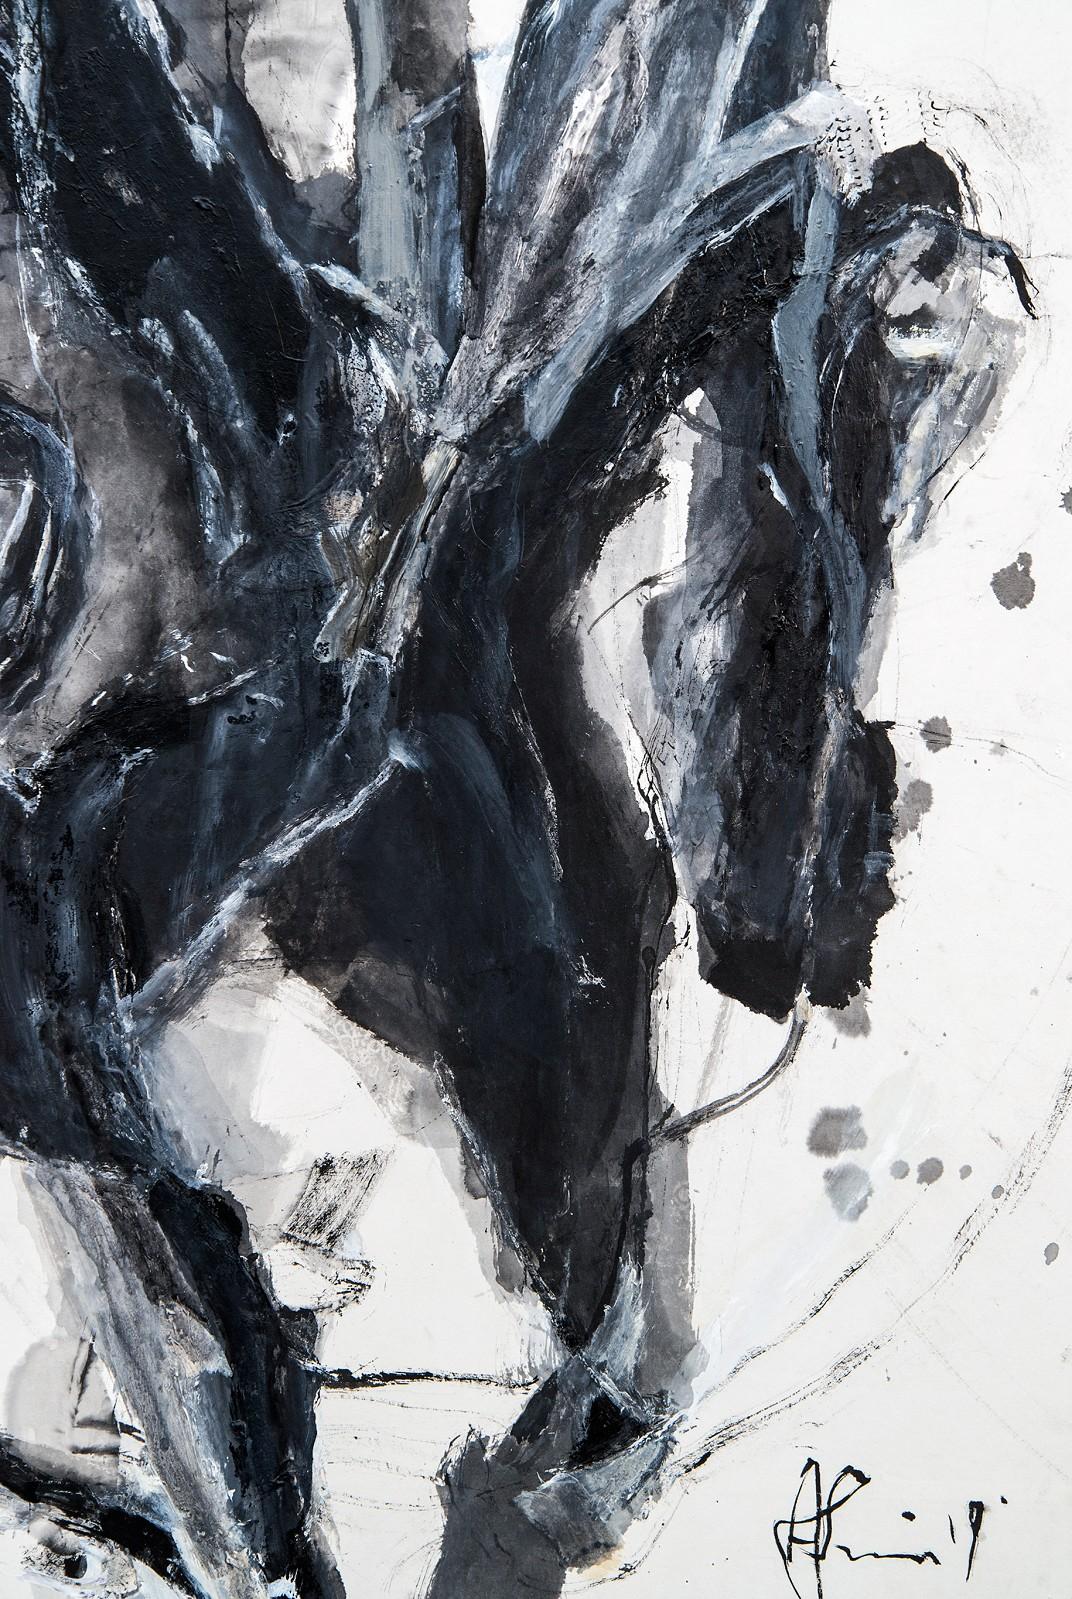 Dynamic black and gray strokes of acrylic paint give the impression of galloping horses in this abstract painting by Andrew Lui. Lui continues to use the expressive and elegant movement of horses and their riders to interpret the human journey.